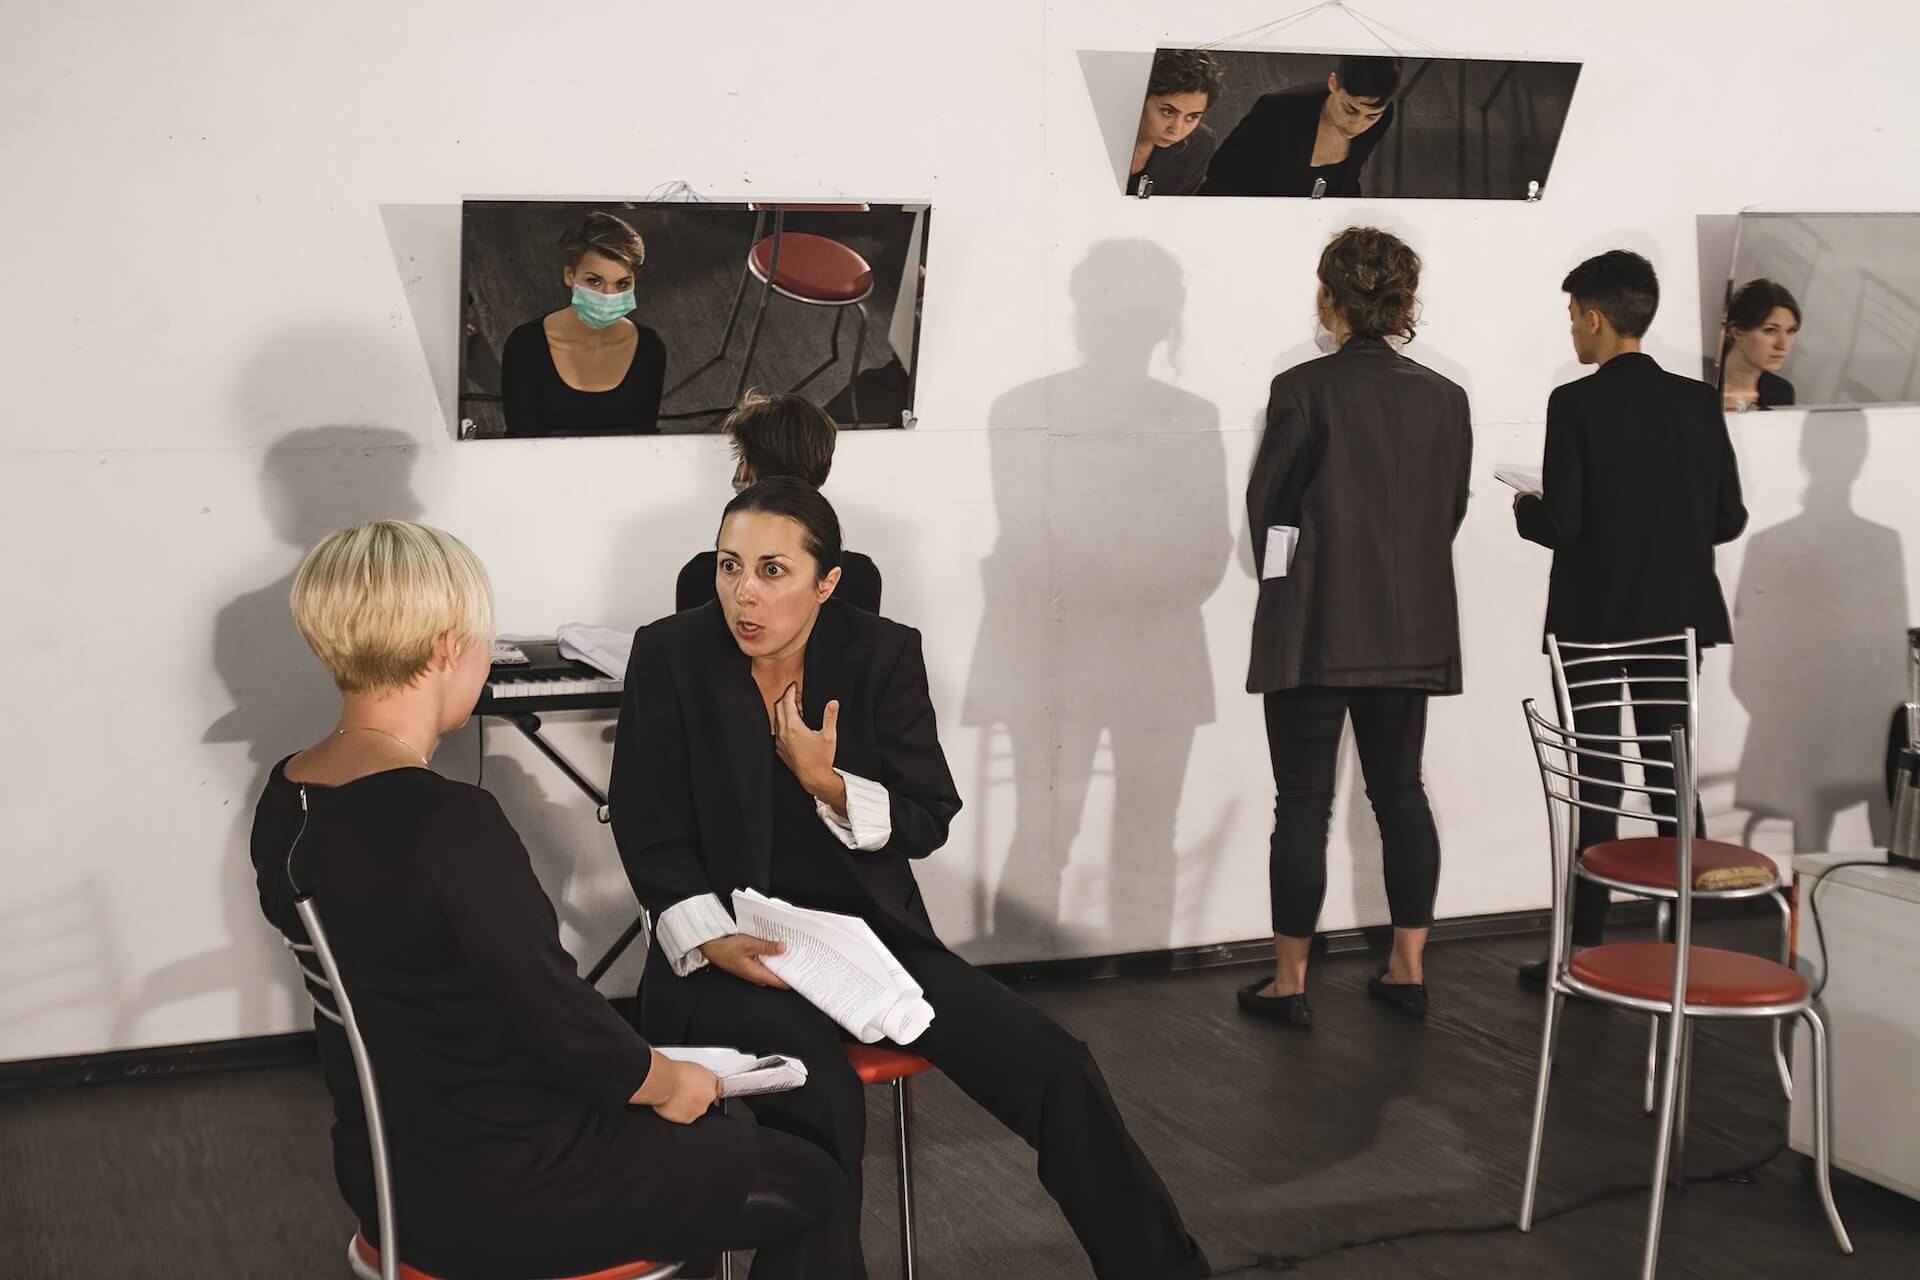 There are five performers wearing black suits in a room with three mirrors hanging by the wall. Two of them are sitting on chairs, holding a roll of script and talking to each other. One is sitting in front of one of the mirrors wearing a disposable mask. Two others are standing in front of another mirror and are talking to each other.